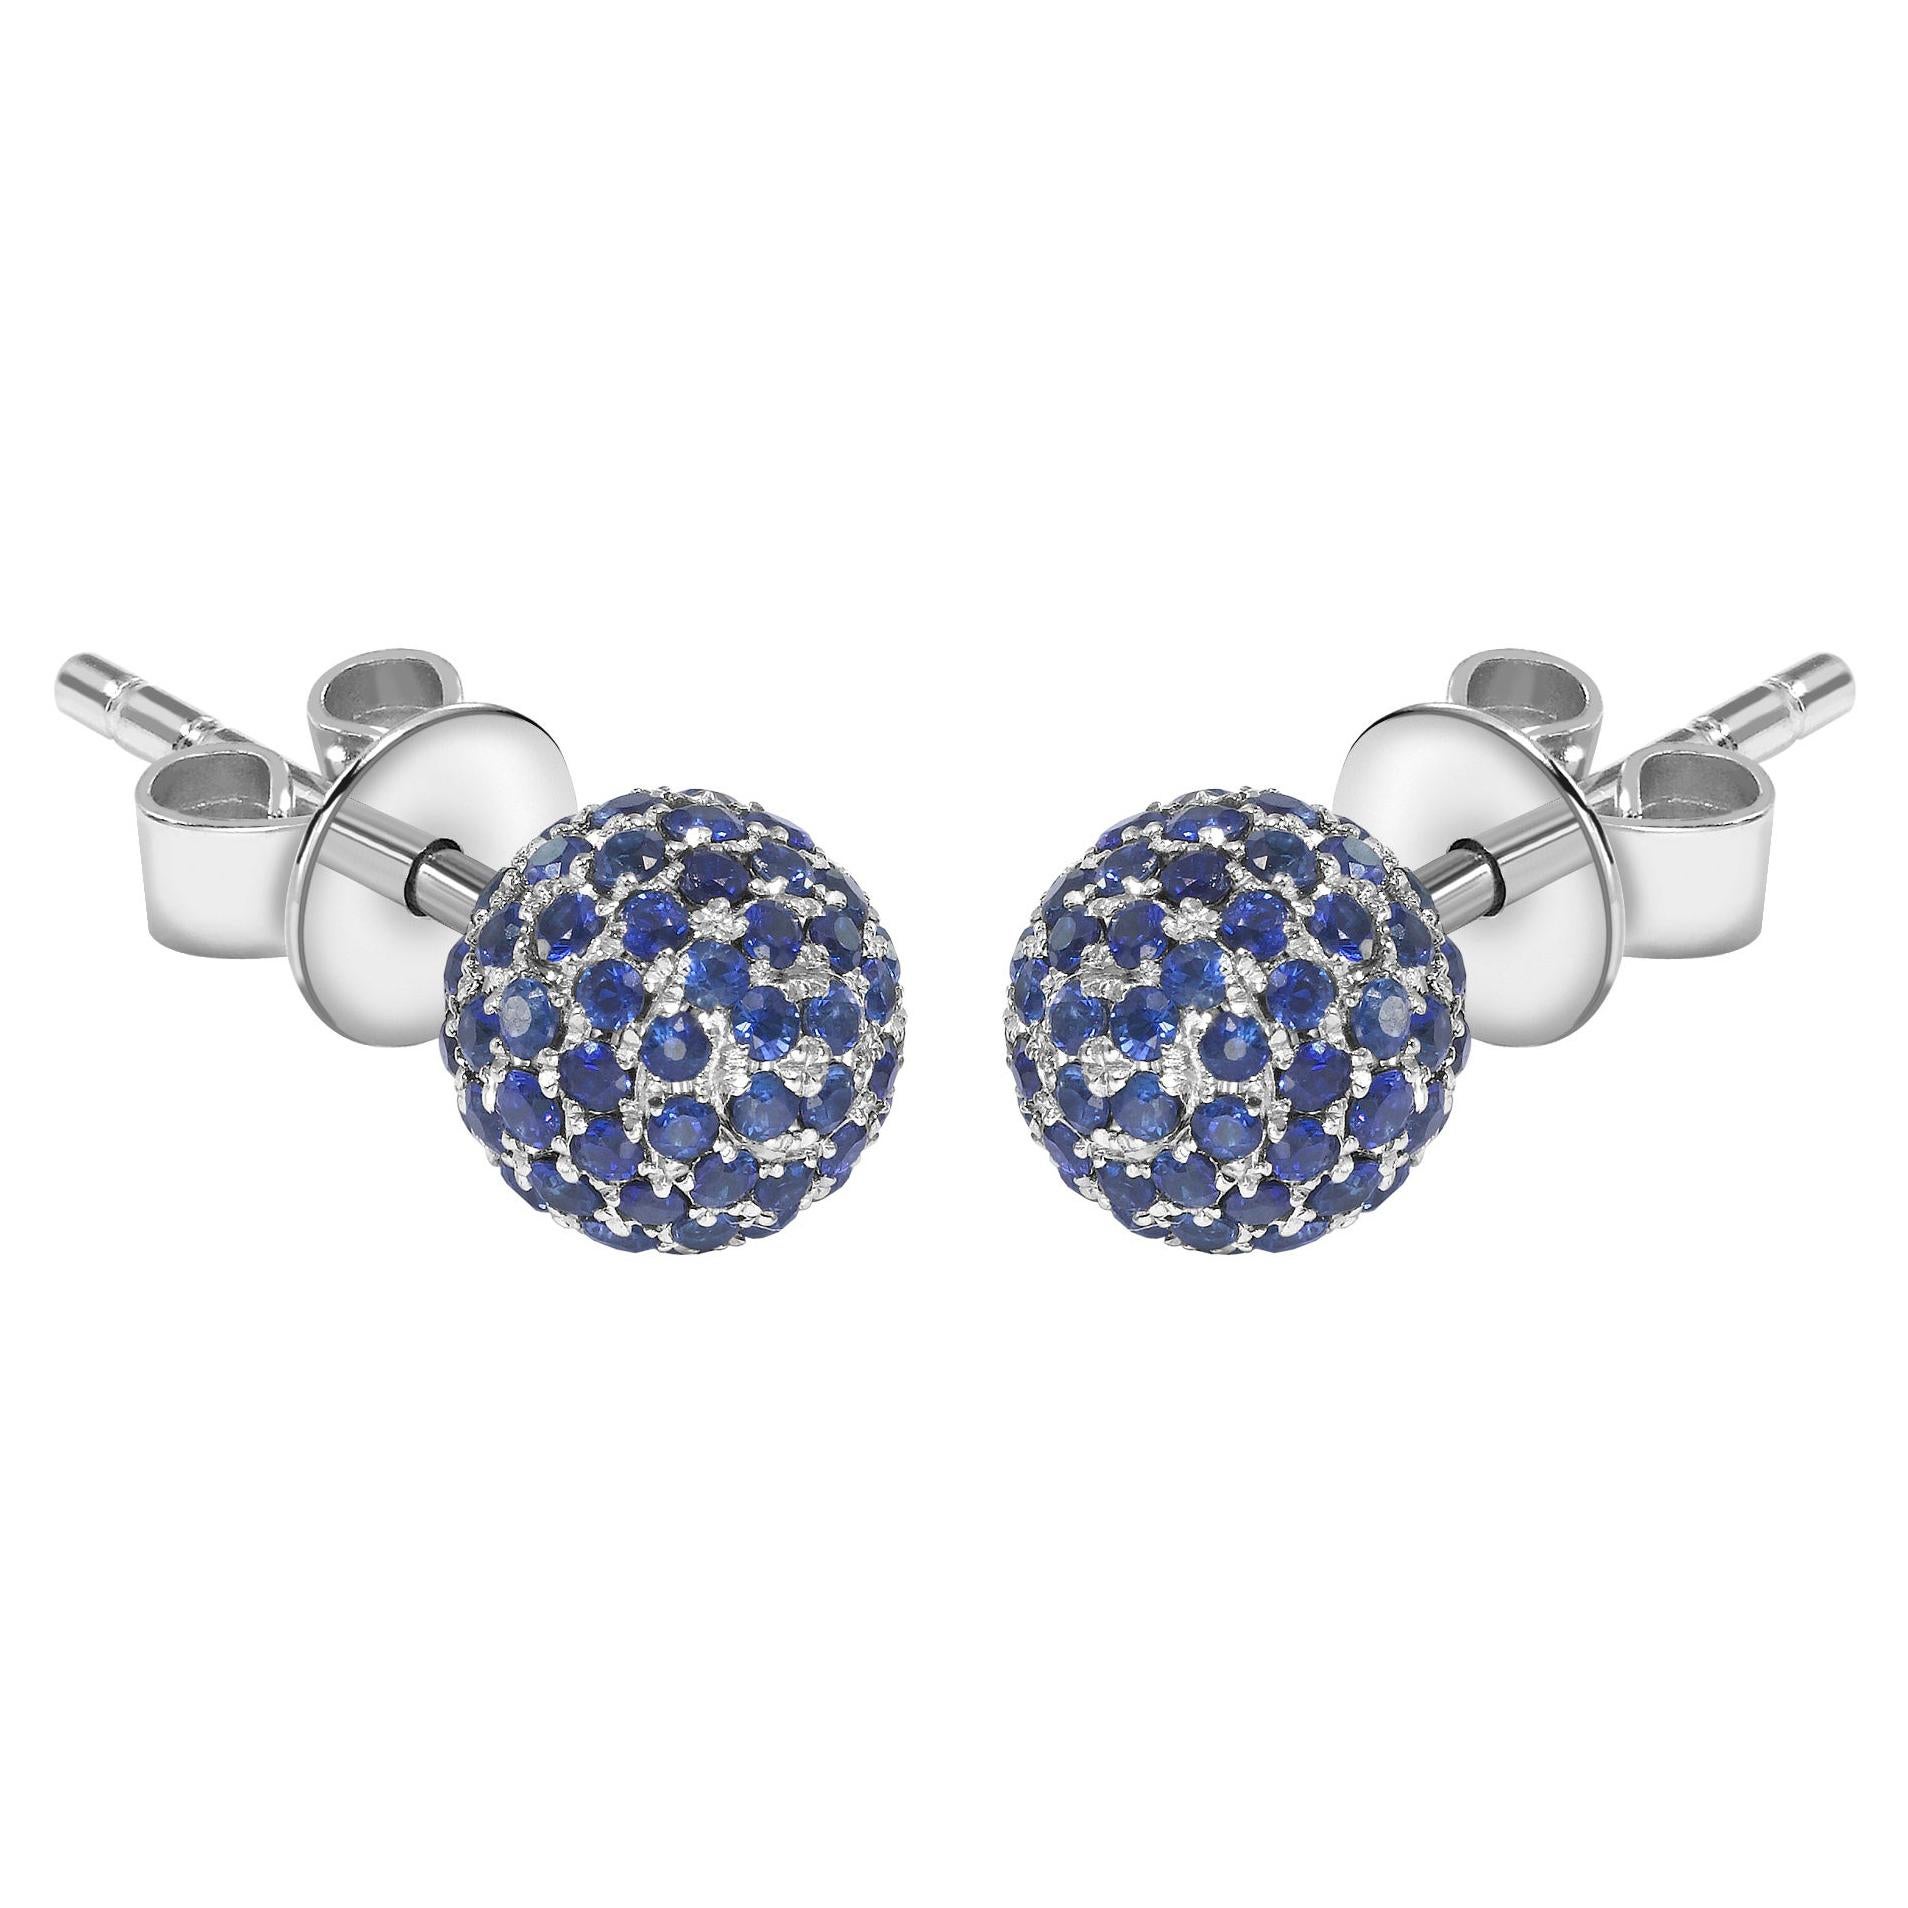 1.00 Carat Pave Set Round Blue Sapphire 18 Karat White Gold Earrings Disco Ball For Sale